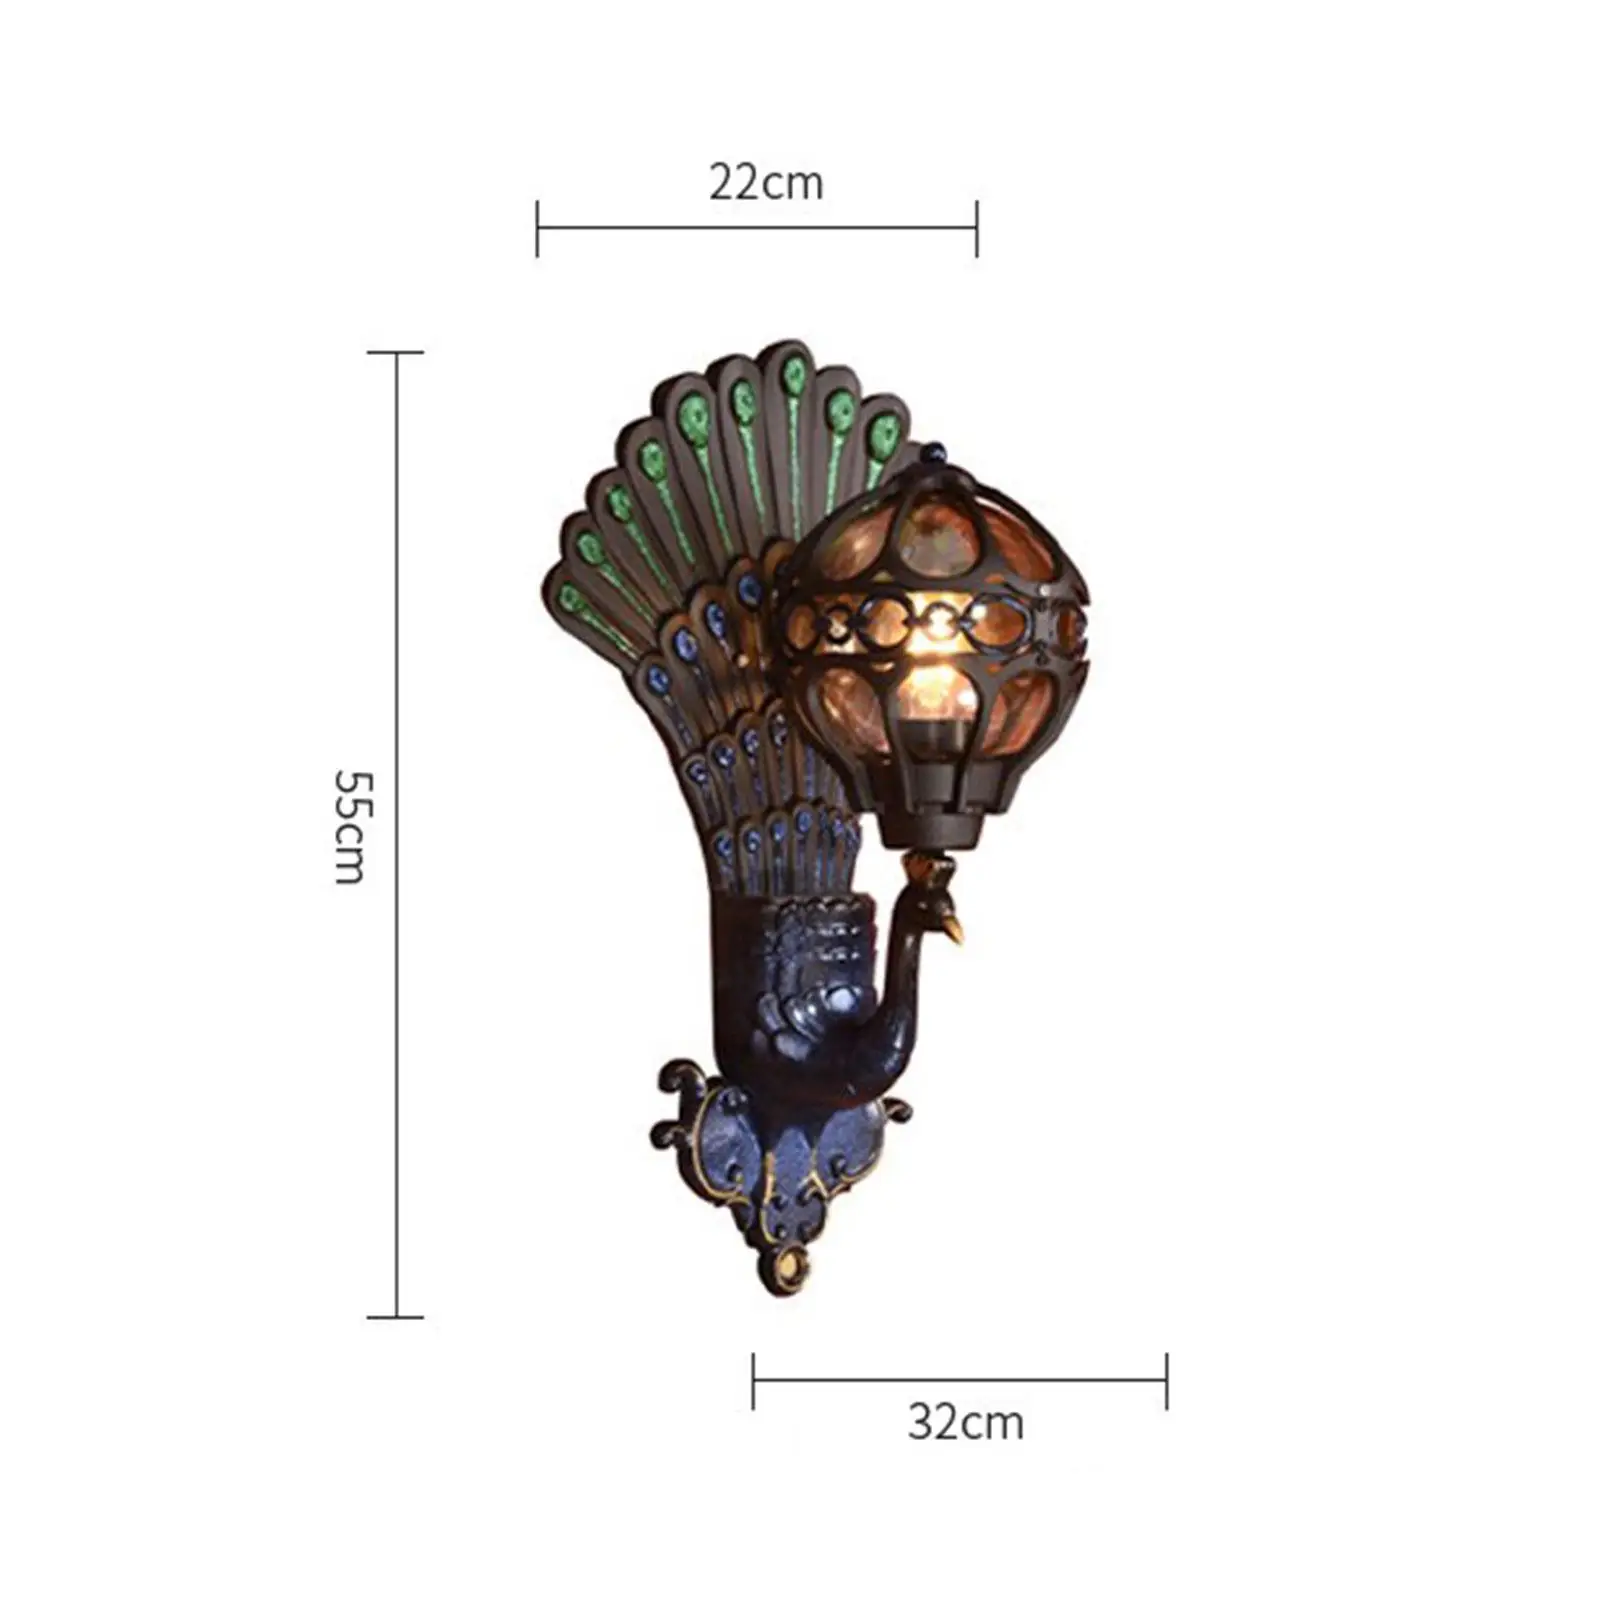 Outdoor Peacock Wall Light Retro Style Outdoor Wall Lamps Peacock Corridor Aisle Lights for Gate Hallway Yard Outdoor Patio